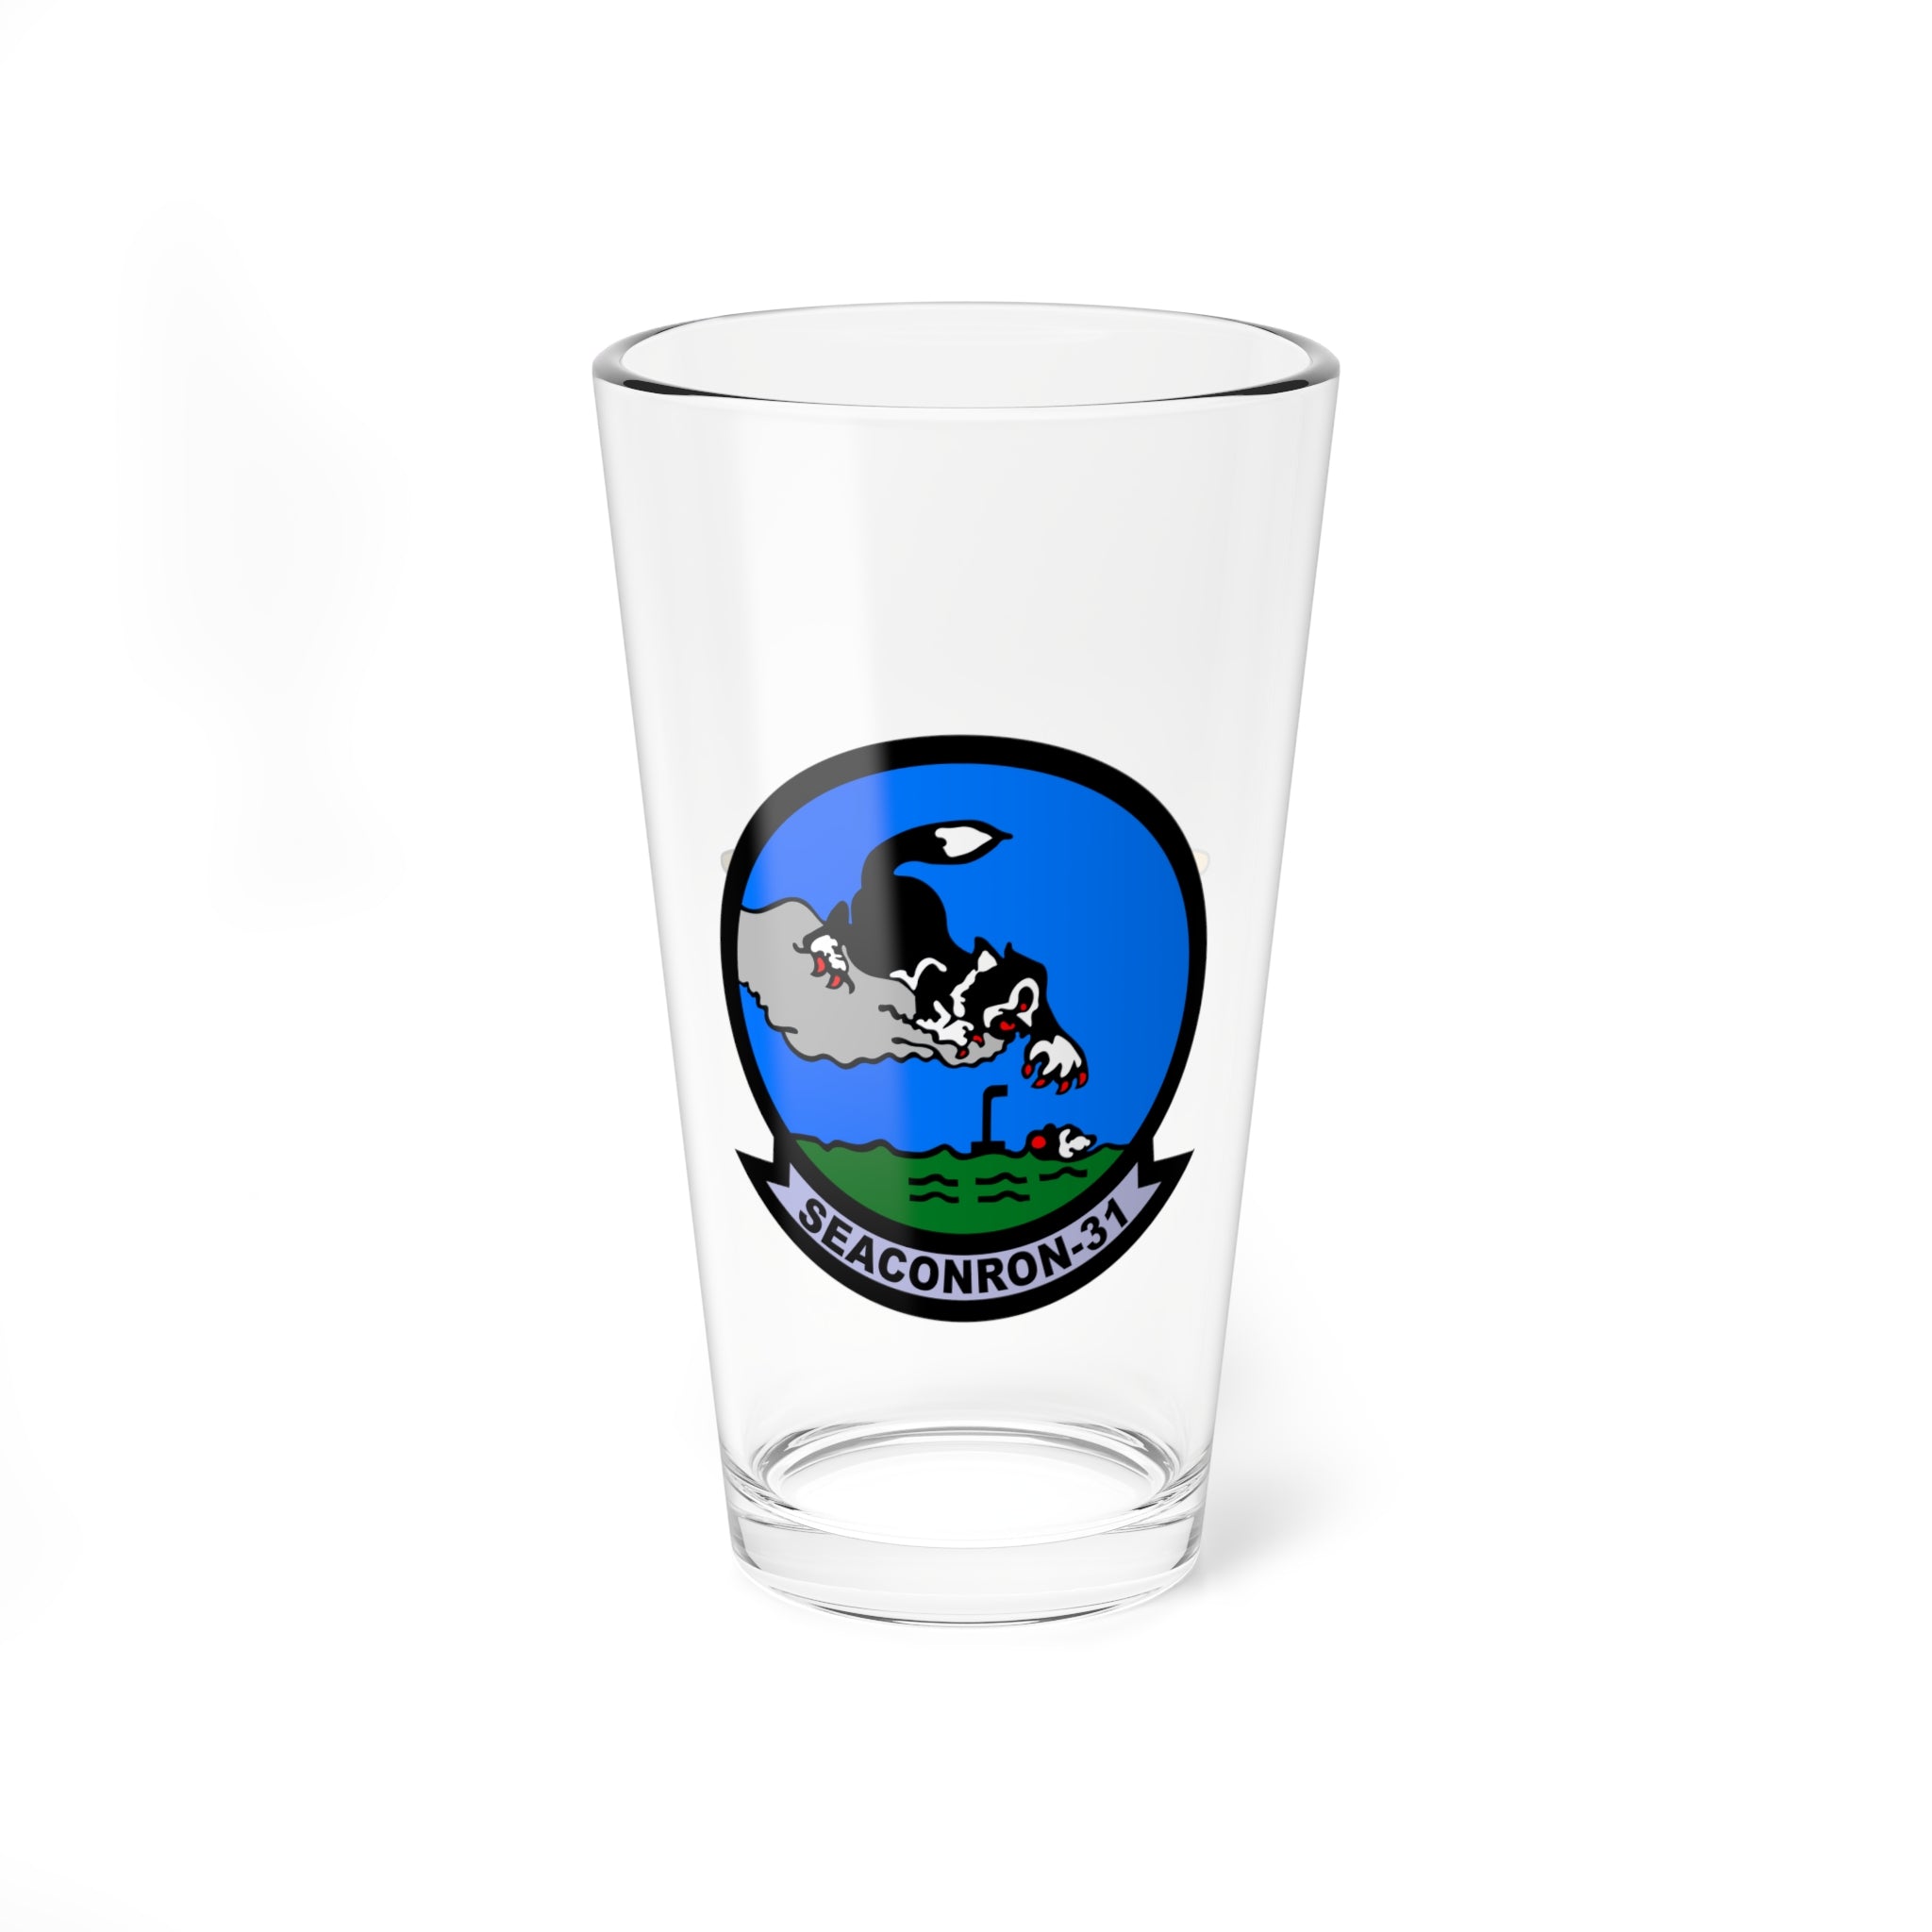 VS-31 "Topcats" Aviator Pint Glass US Navy Sea Control Squadron flying the S_3 Viking for retired and veteran Sailors